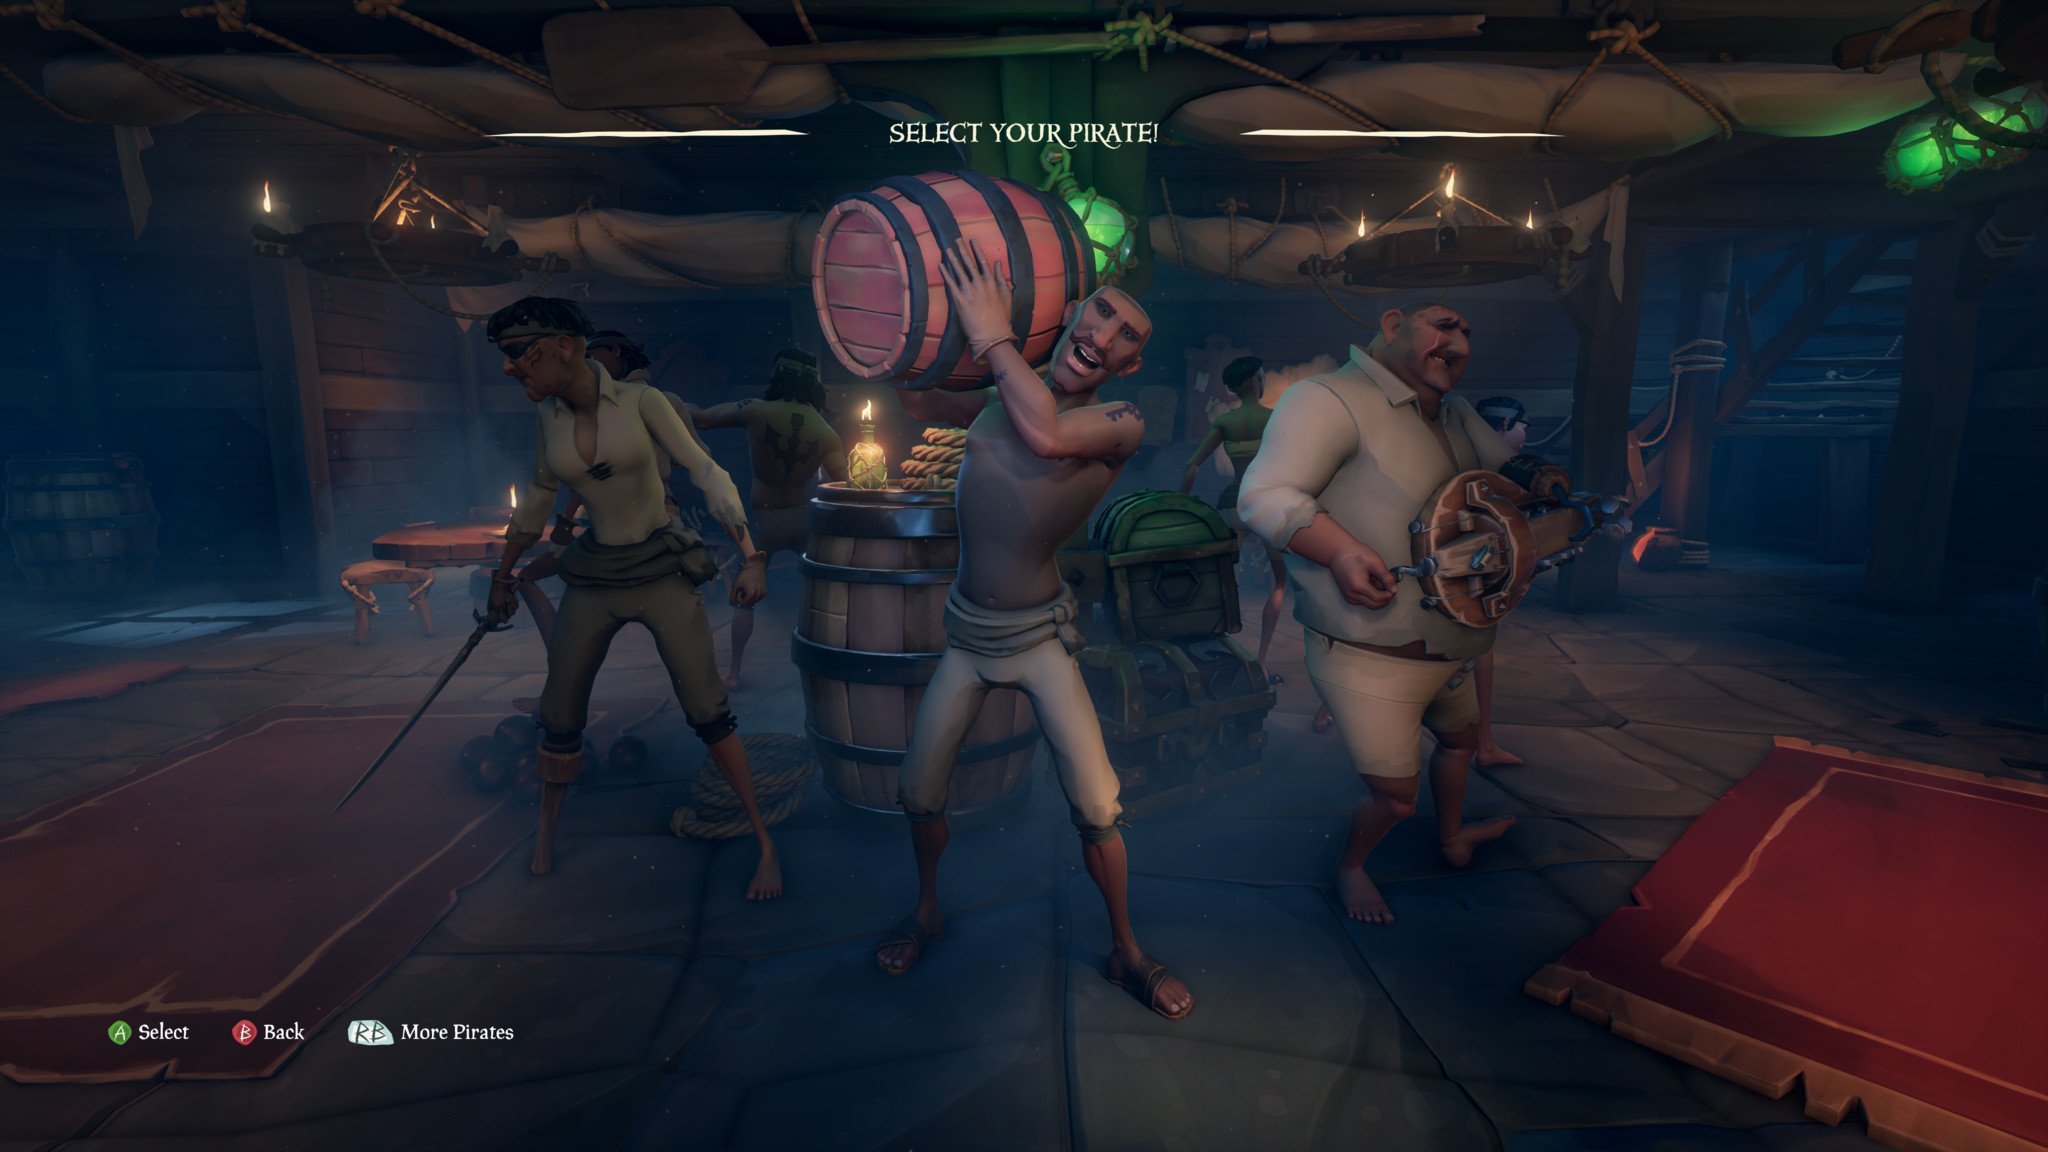 pirate-selection-screen-sea-of-thieves-2.jpg